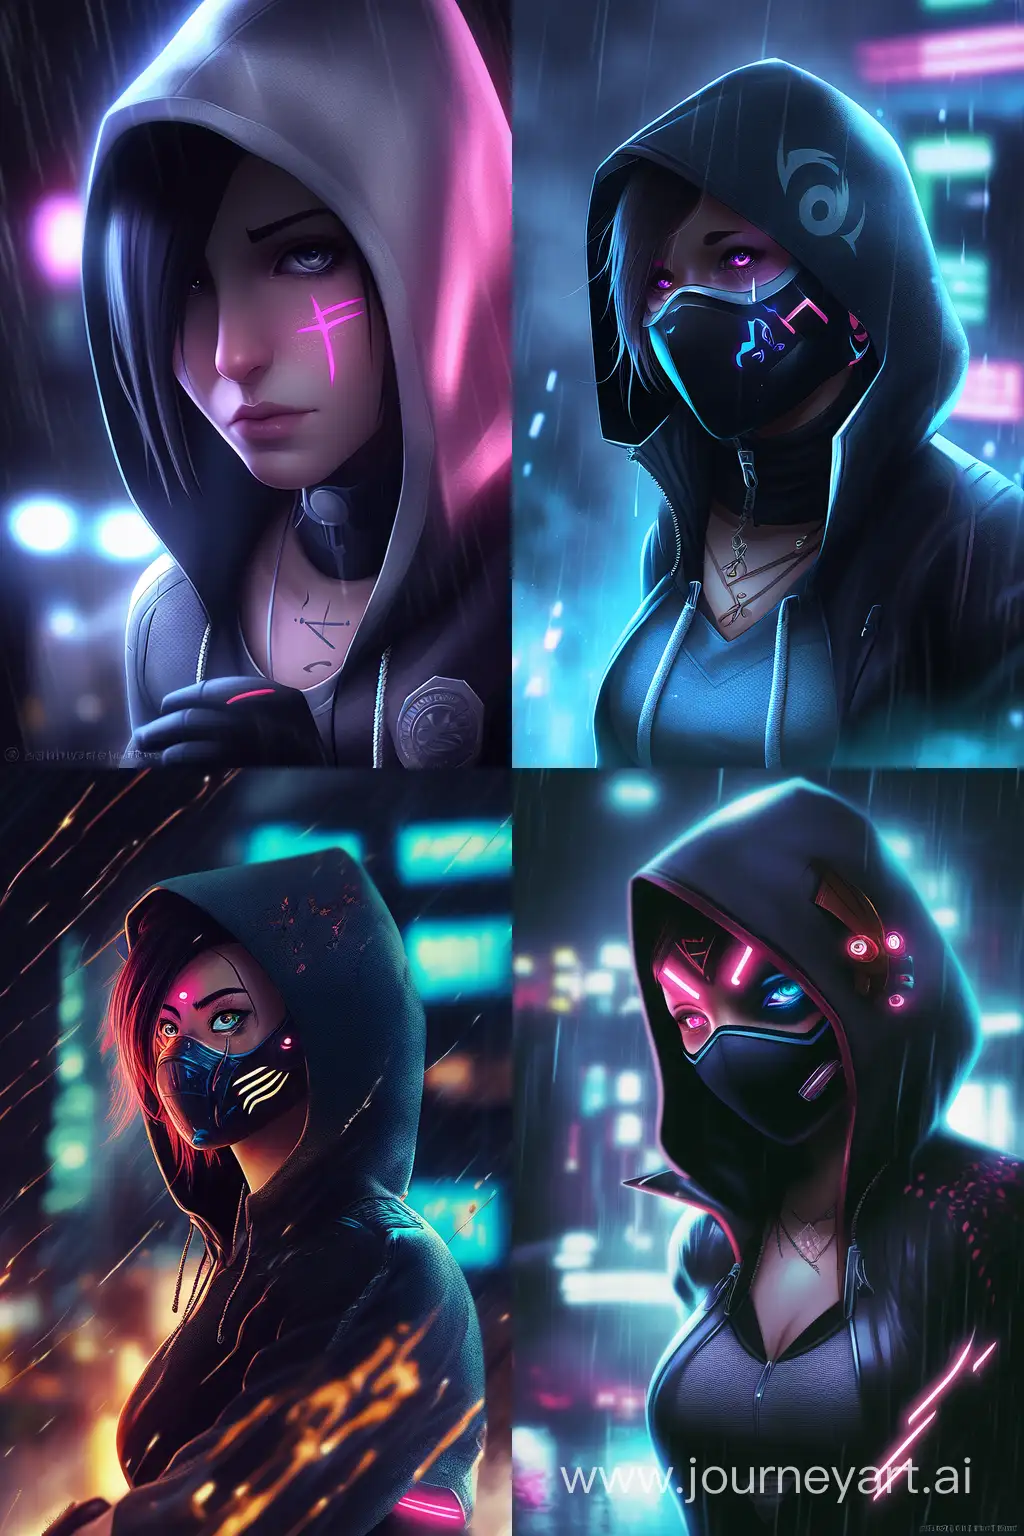 /imagine prompt:
color photo of a Japanese style realistic anime character with artistic tattoos on her face, wearing a black hoodie with futuristic lights, and a mask that showcases her coolness. The scene is set in cinematic lighting with a rainy background. —c 10 —ar 2:3